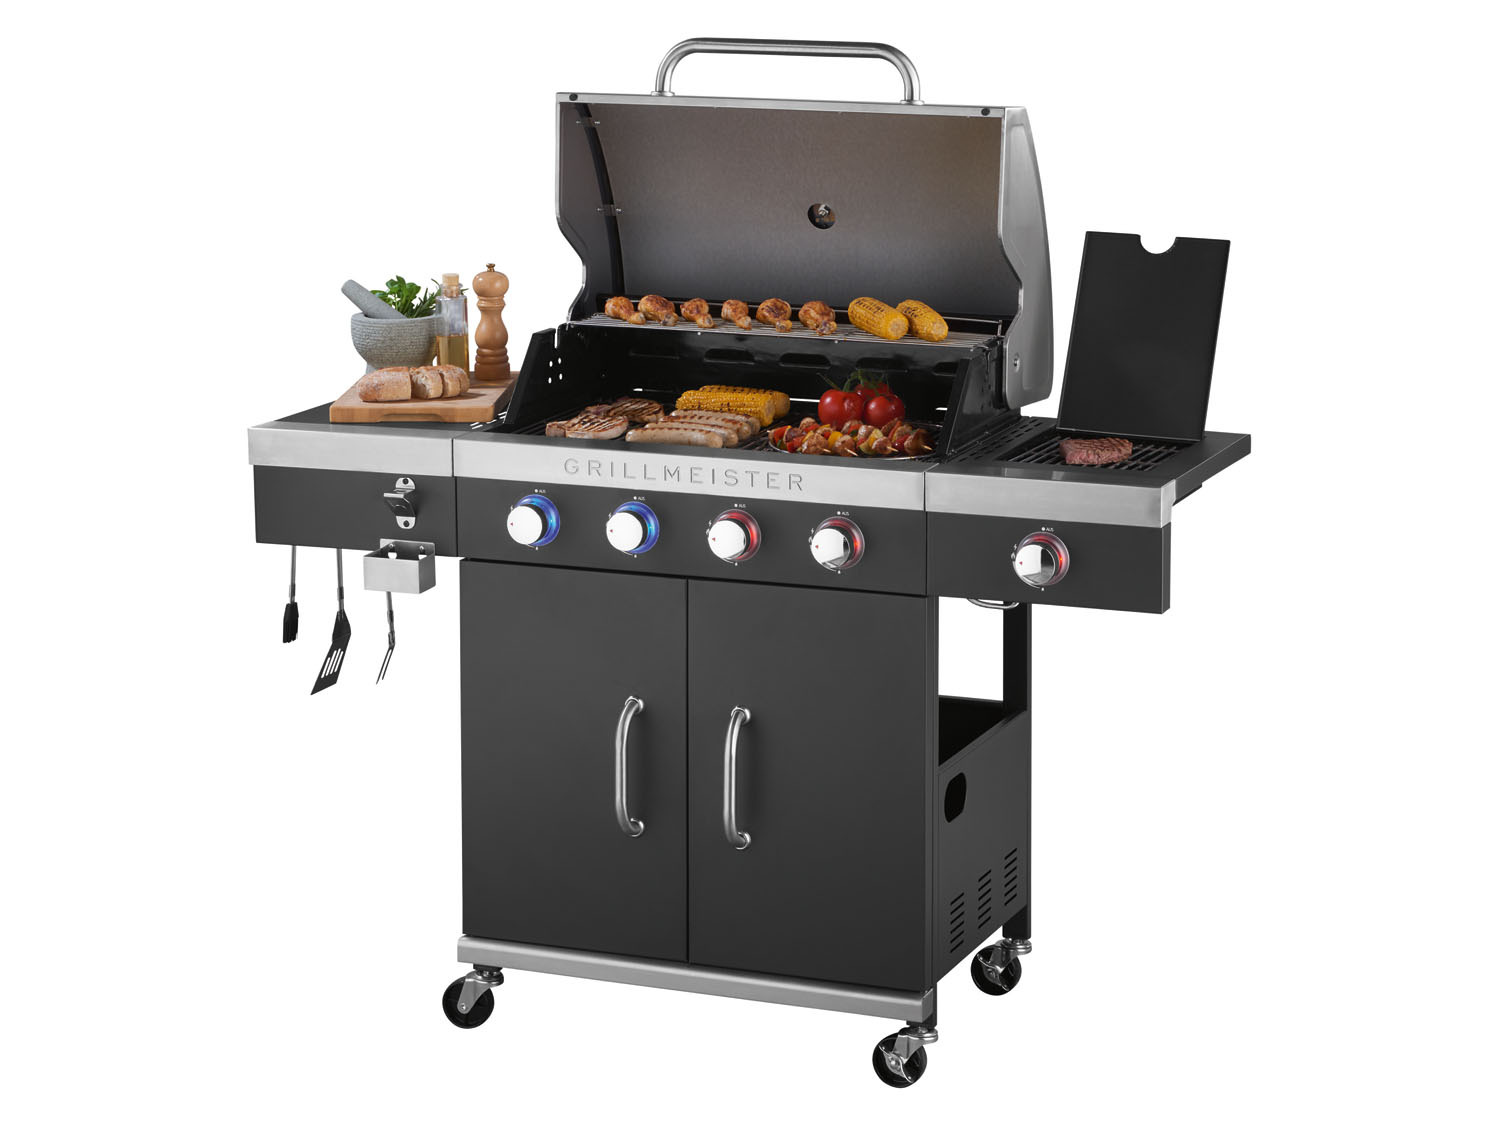 GRILLMEISTER Gasgrill, 4plus1 Brenner, | LIDL 19,7 kW